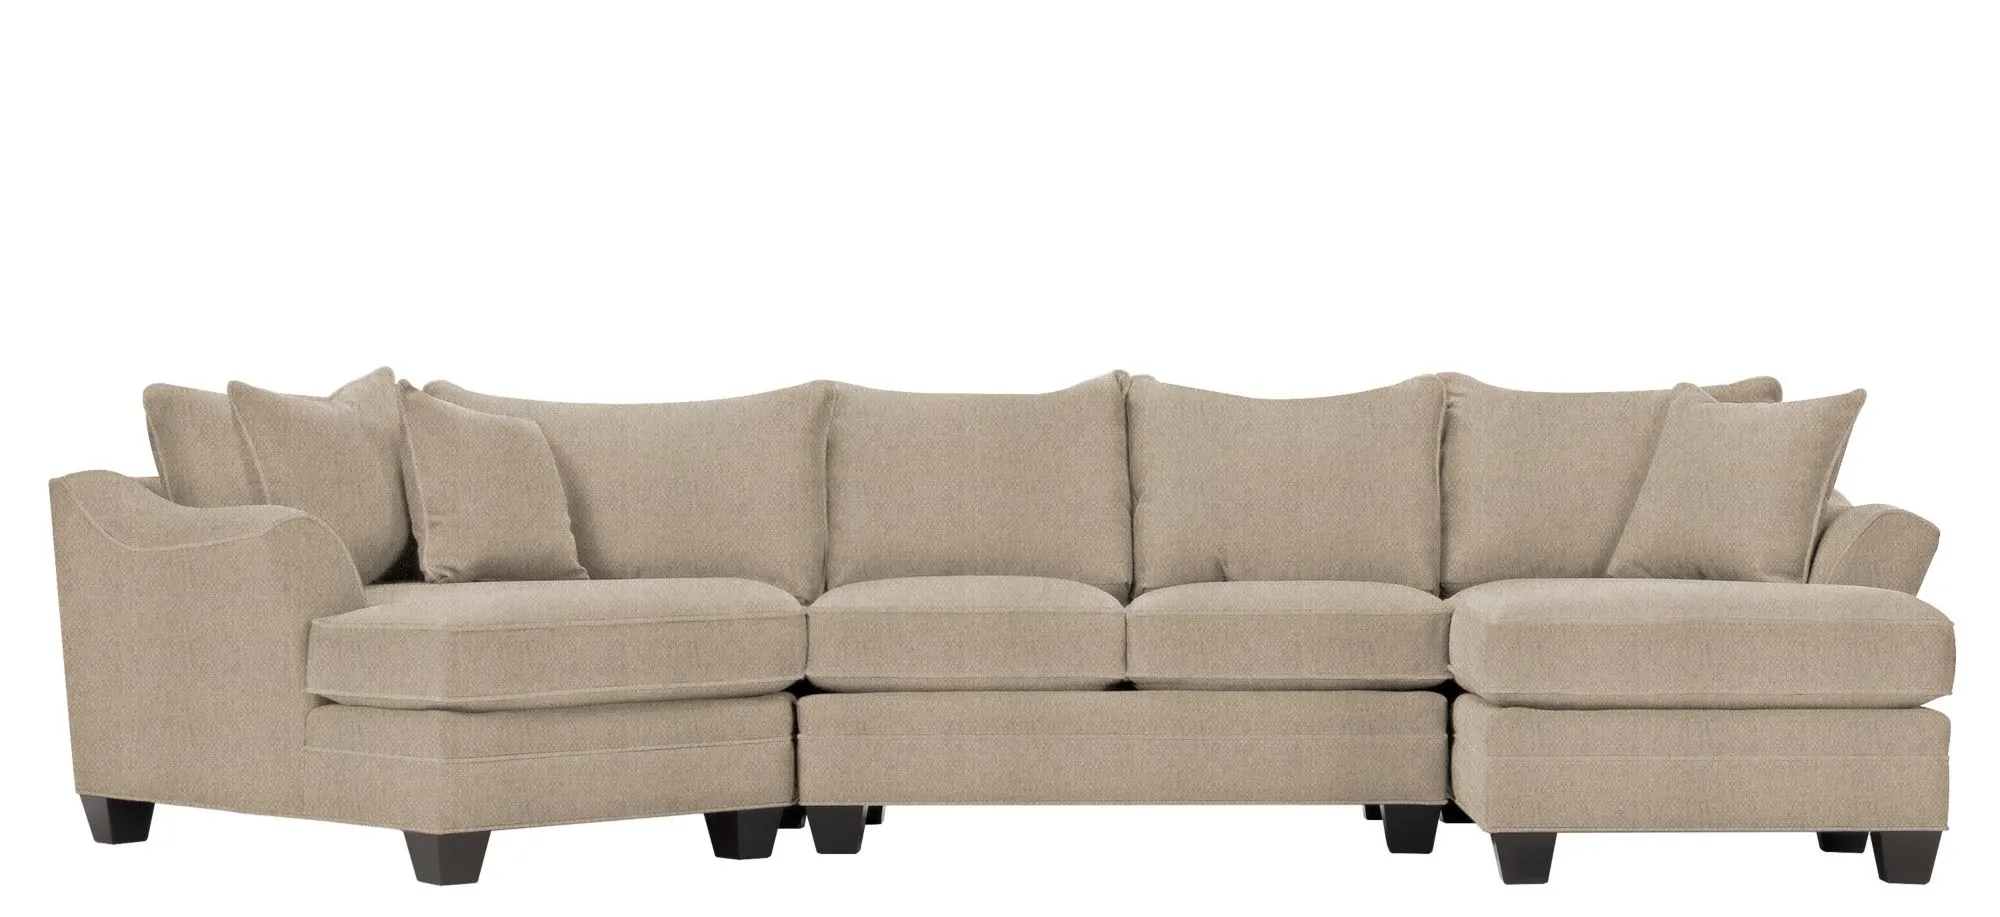 Foresthill 3-pc. Right Hand Facing Sectional Sofa in Sugar Shack Putty by H.M. Richards